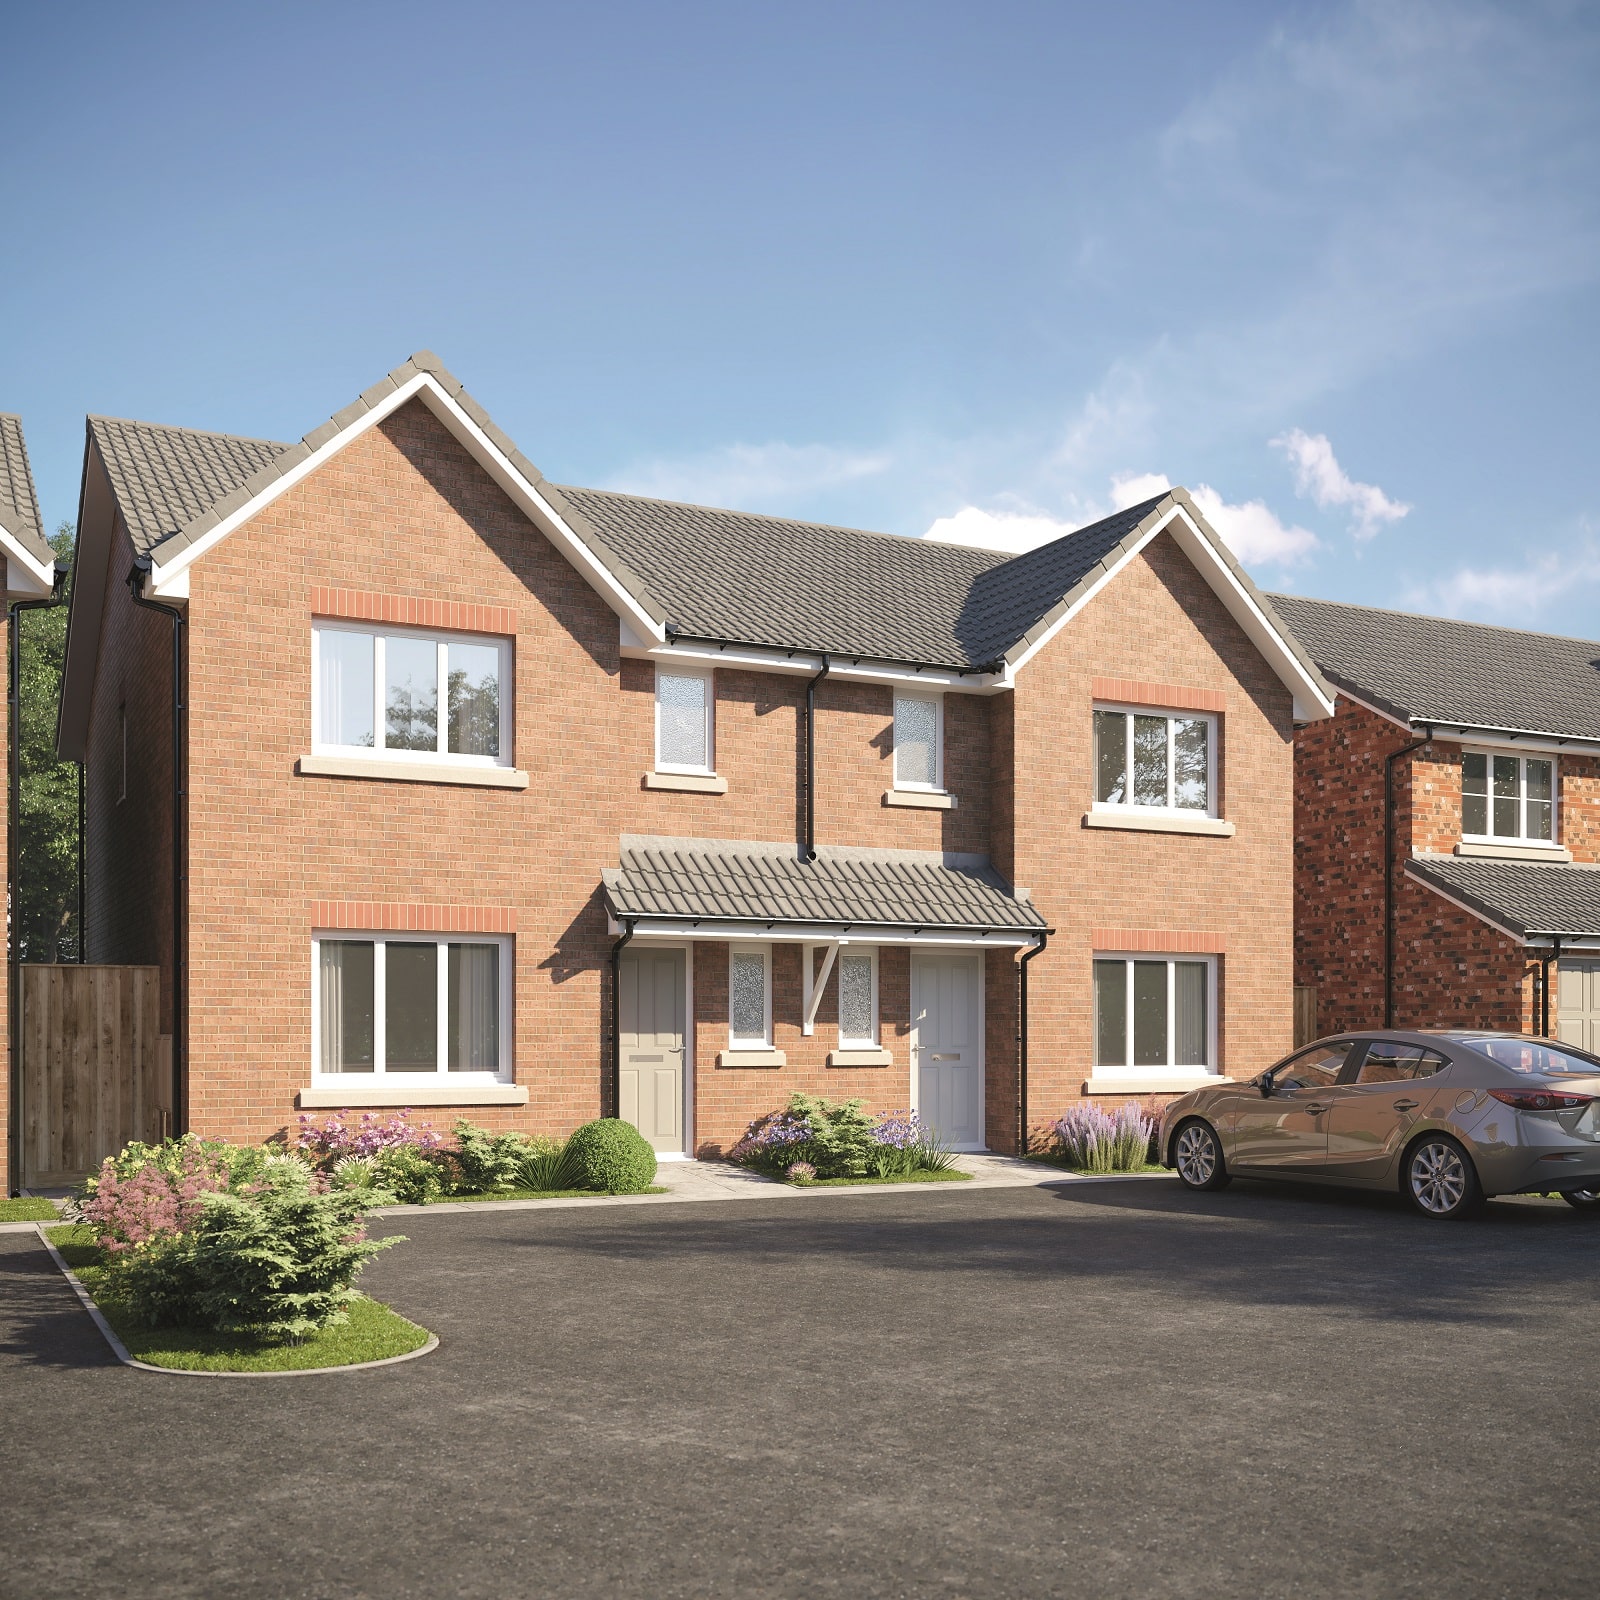 Discounted homes being built at Teasel Green in Eggborough